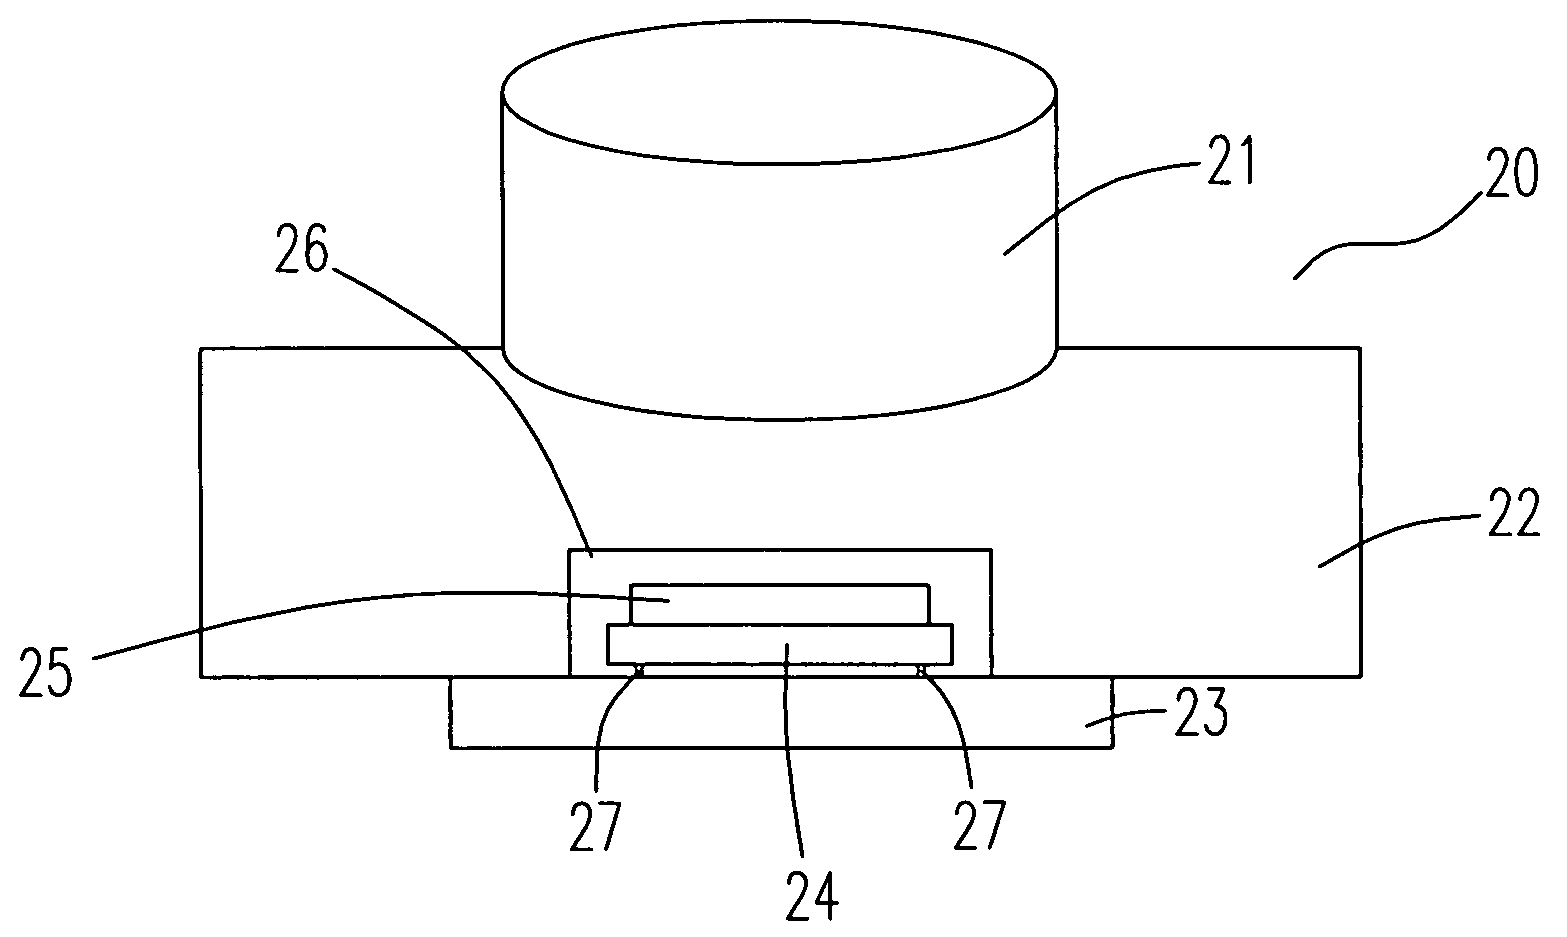 Lens assembly having focal length adjustable by a spacer for obtaining an image of an object